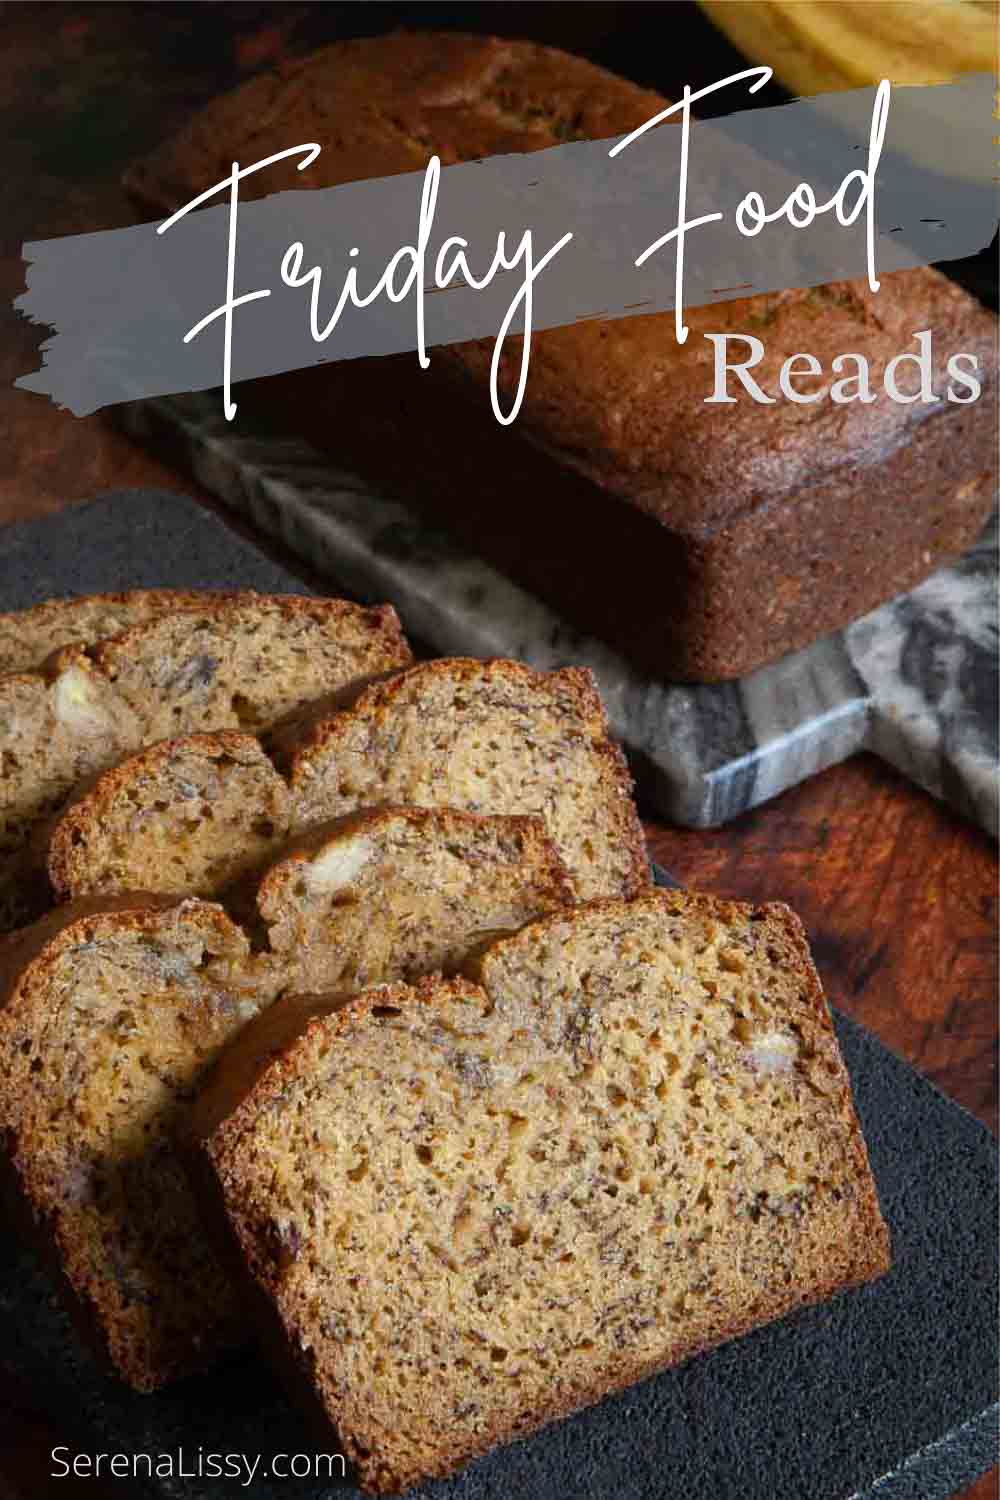 Friday Food Reads Cover Image